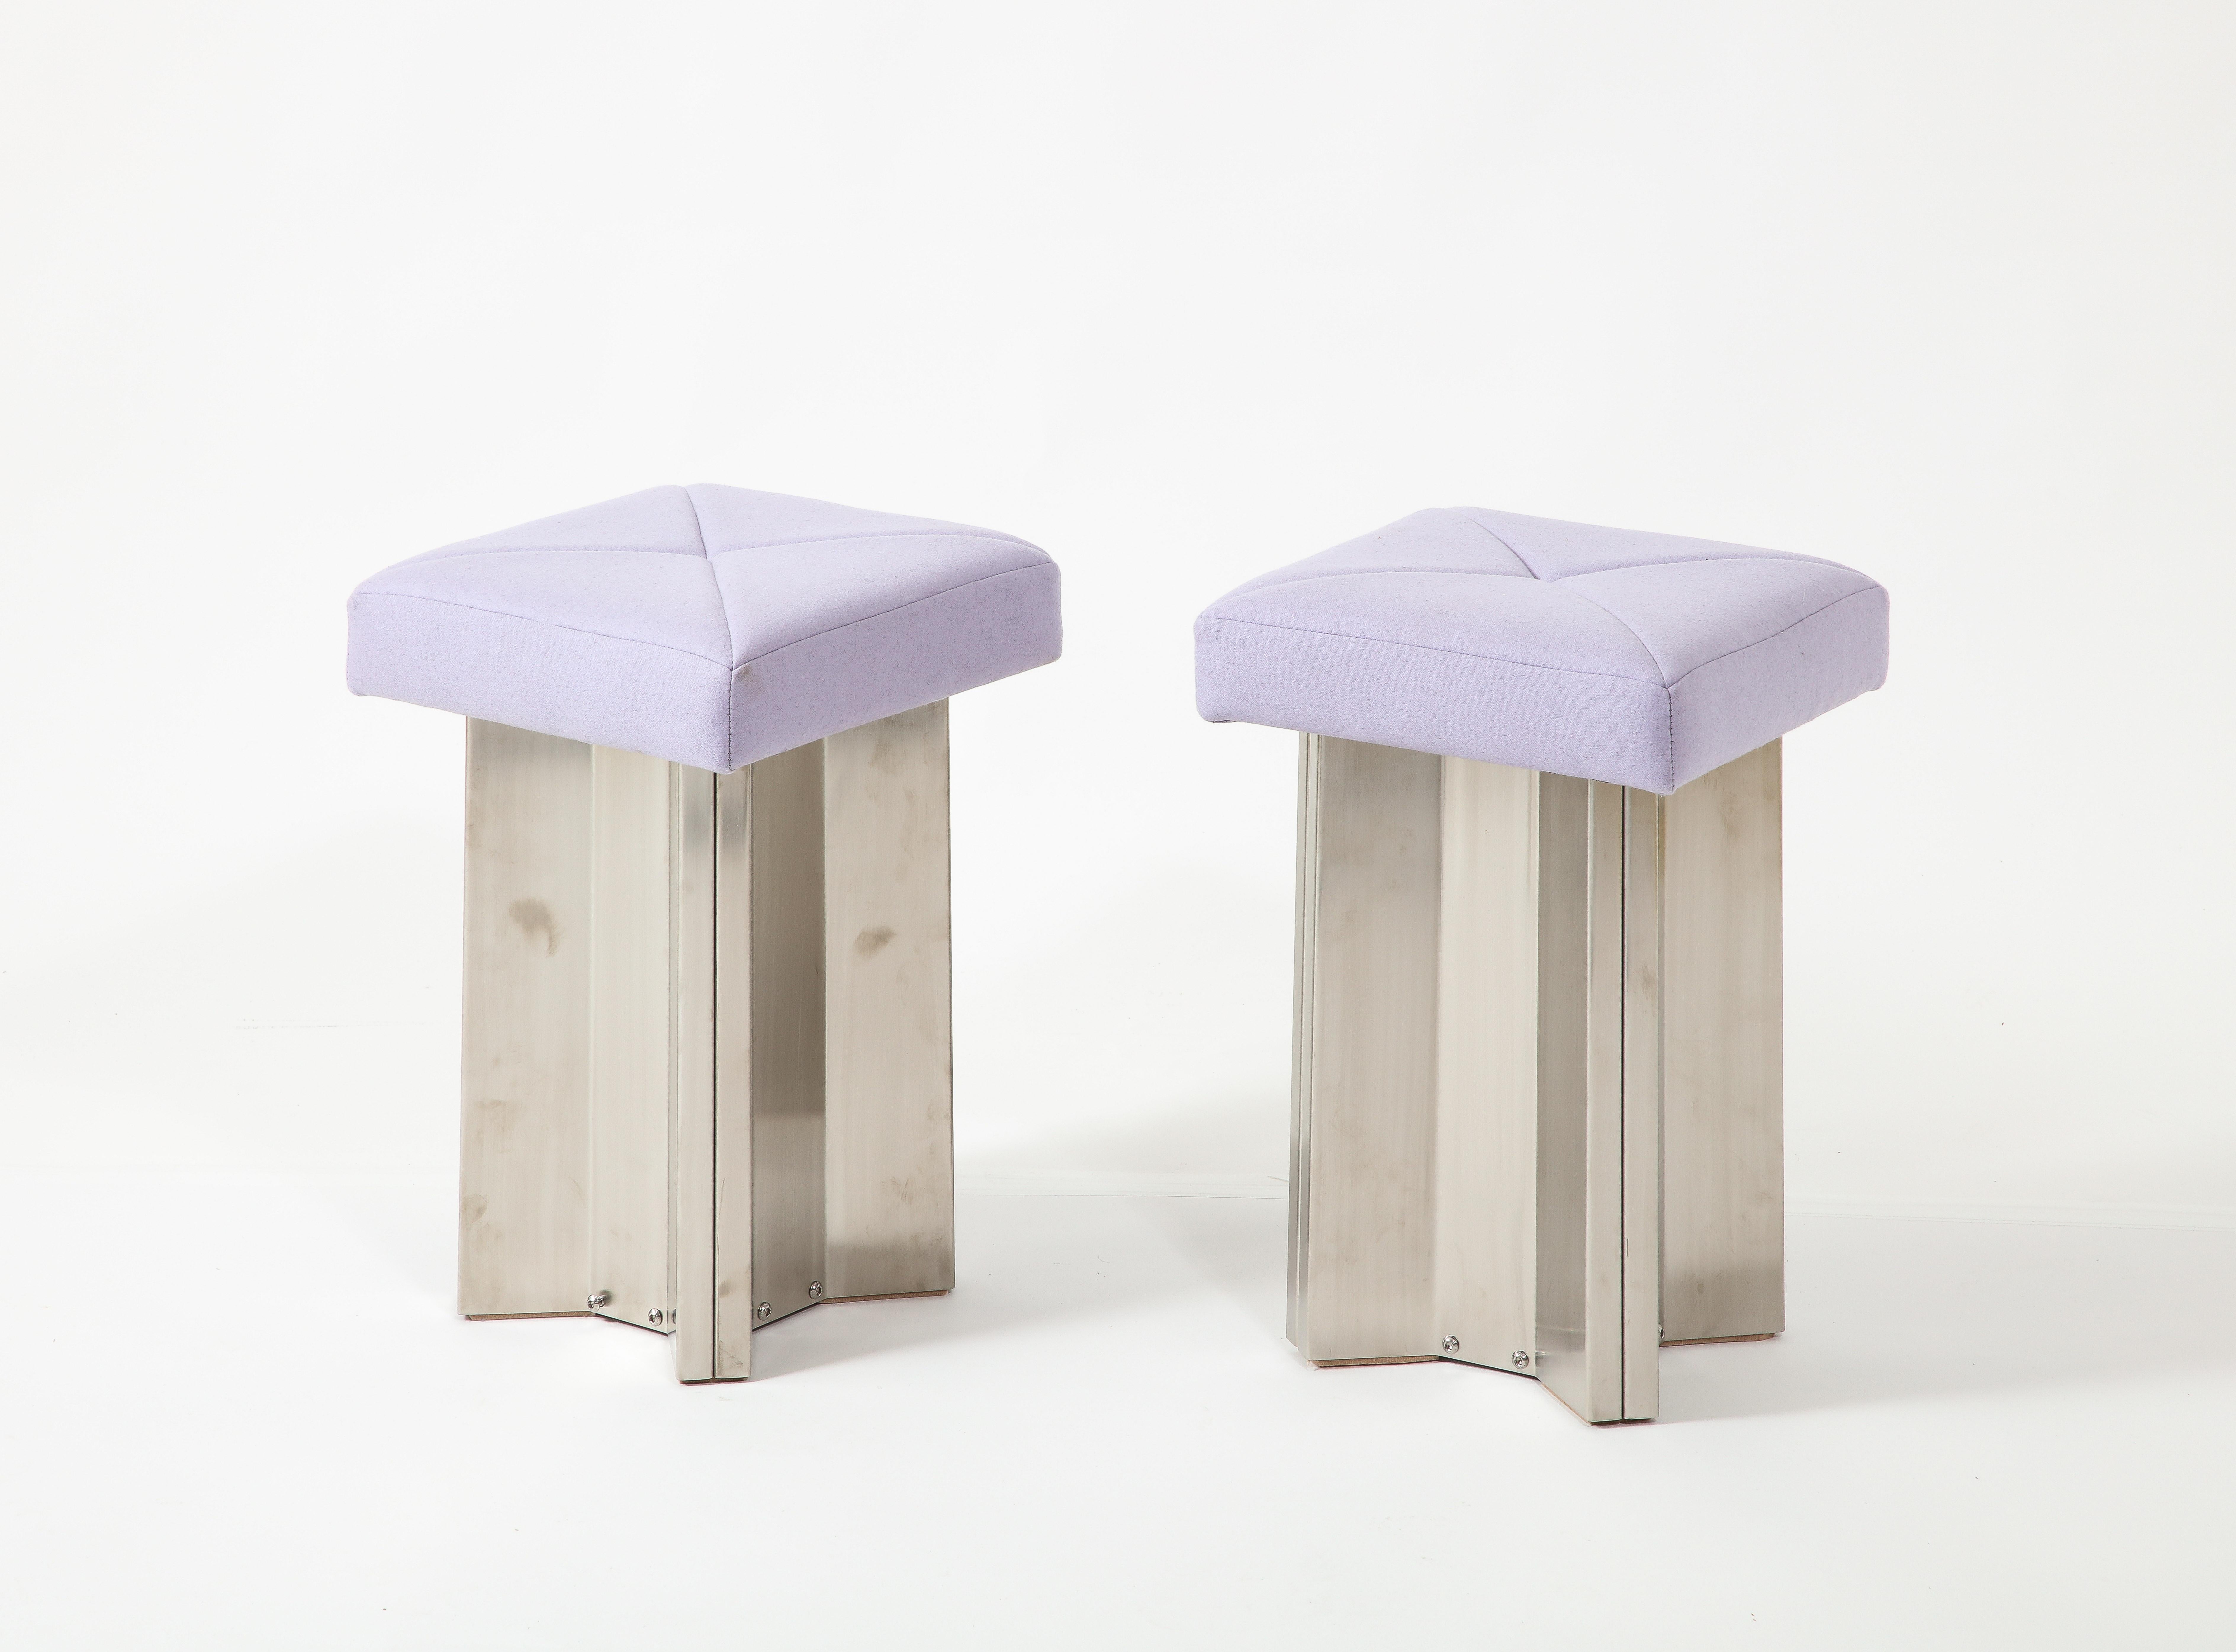 Bent Stainless Steel bases with Lilac cashmere upholstery.
